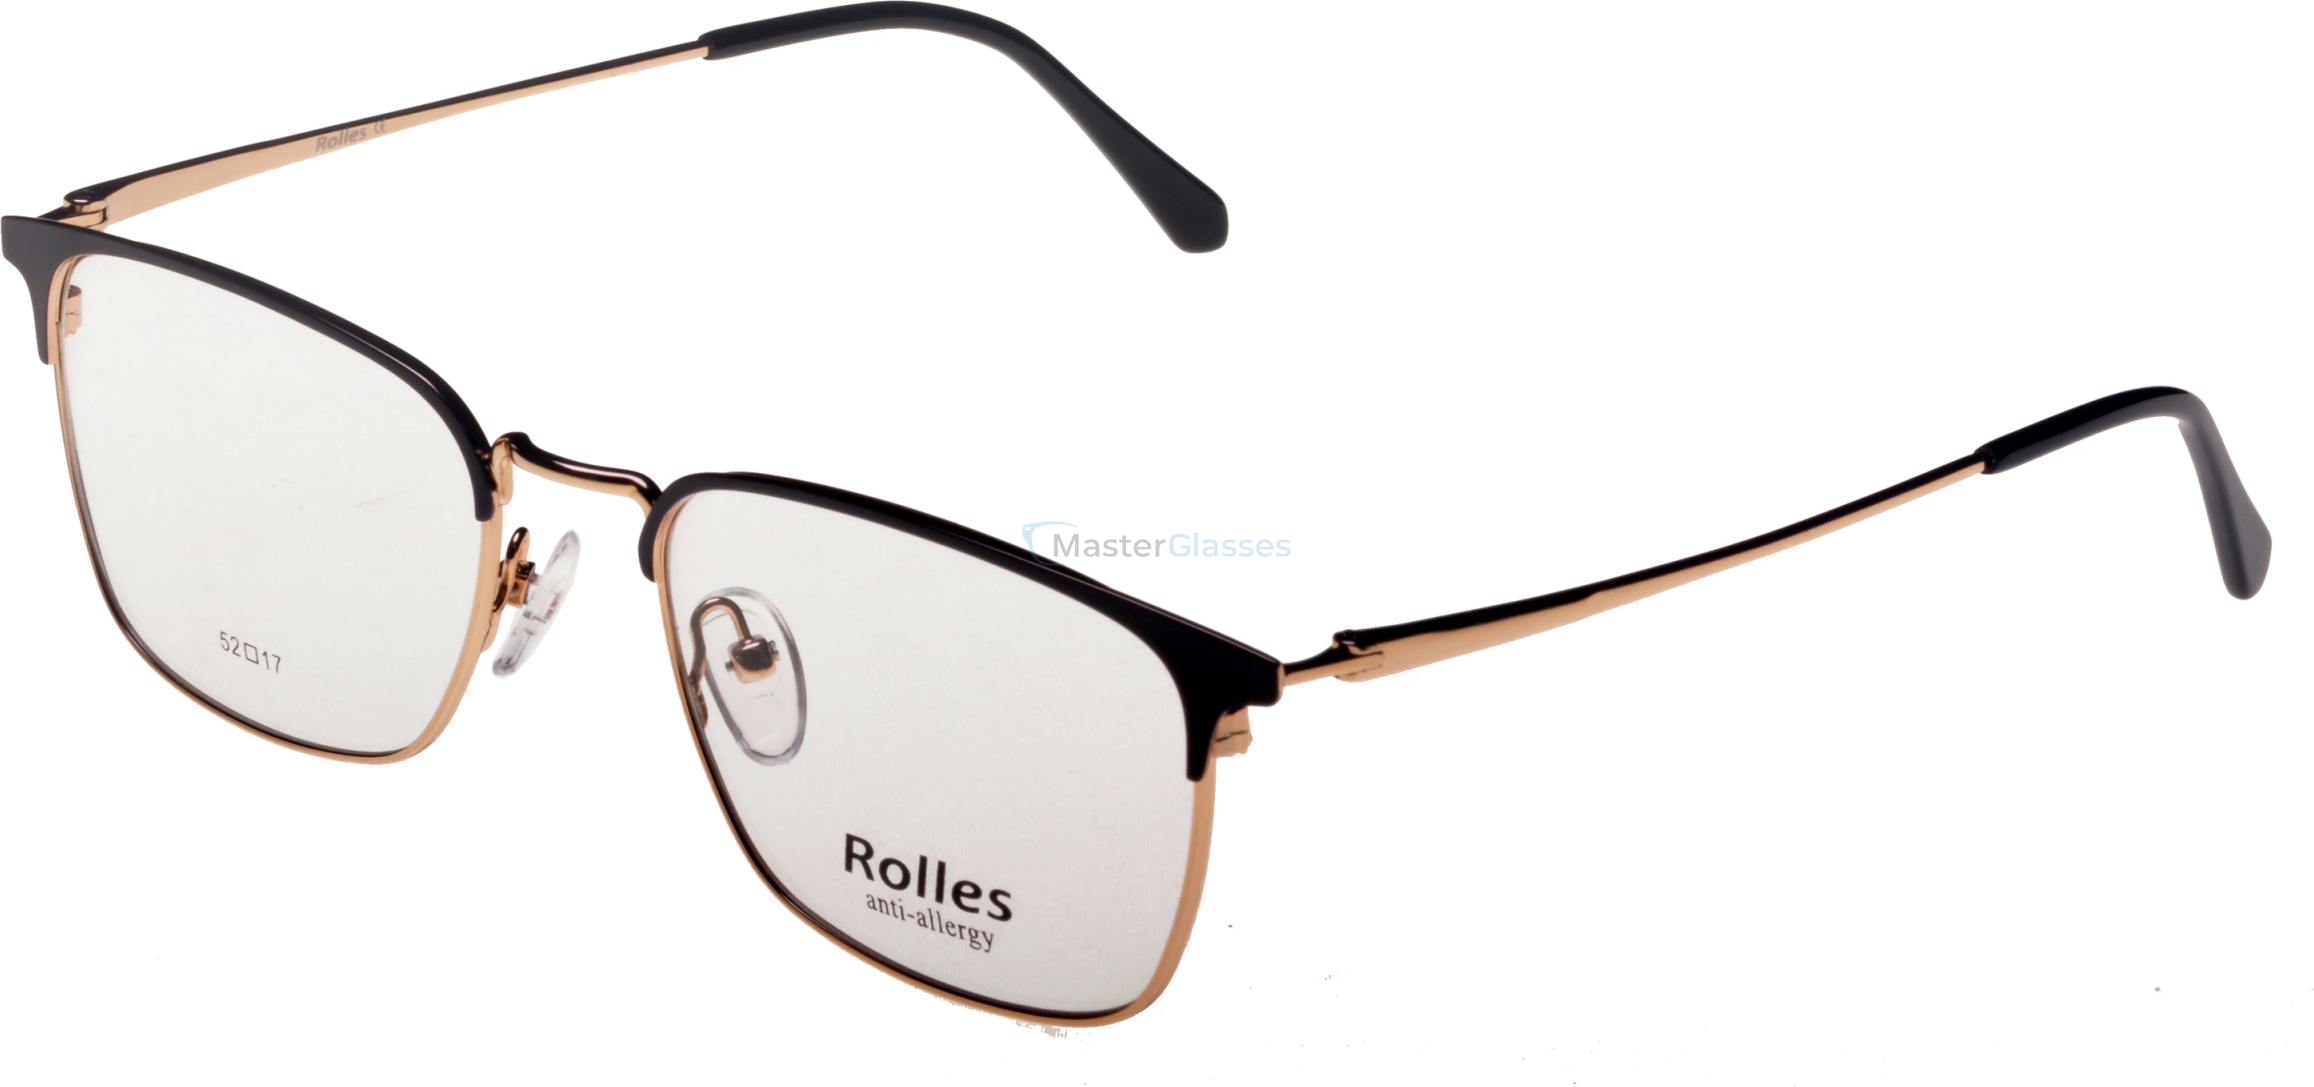  Rolles 667 03